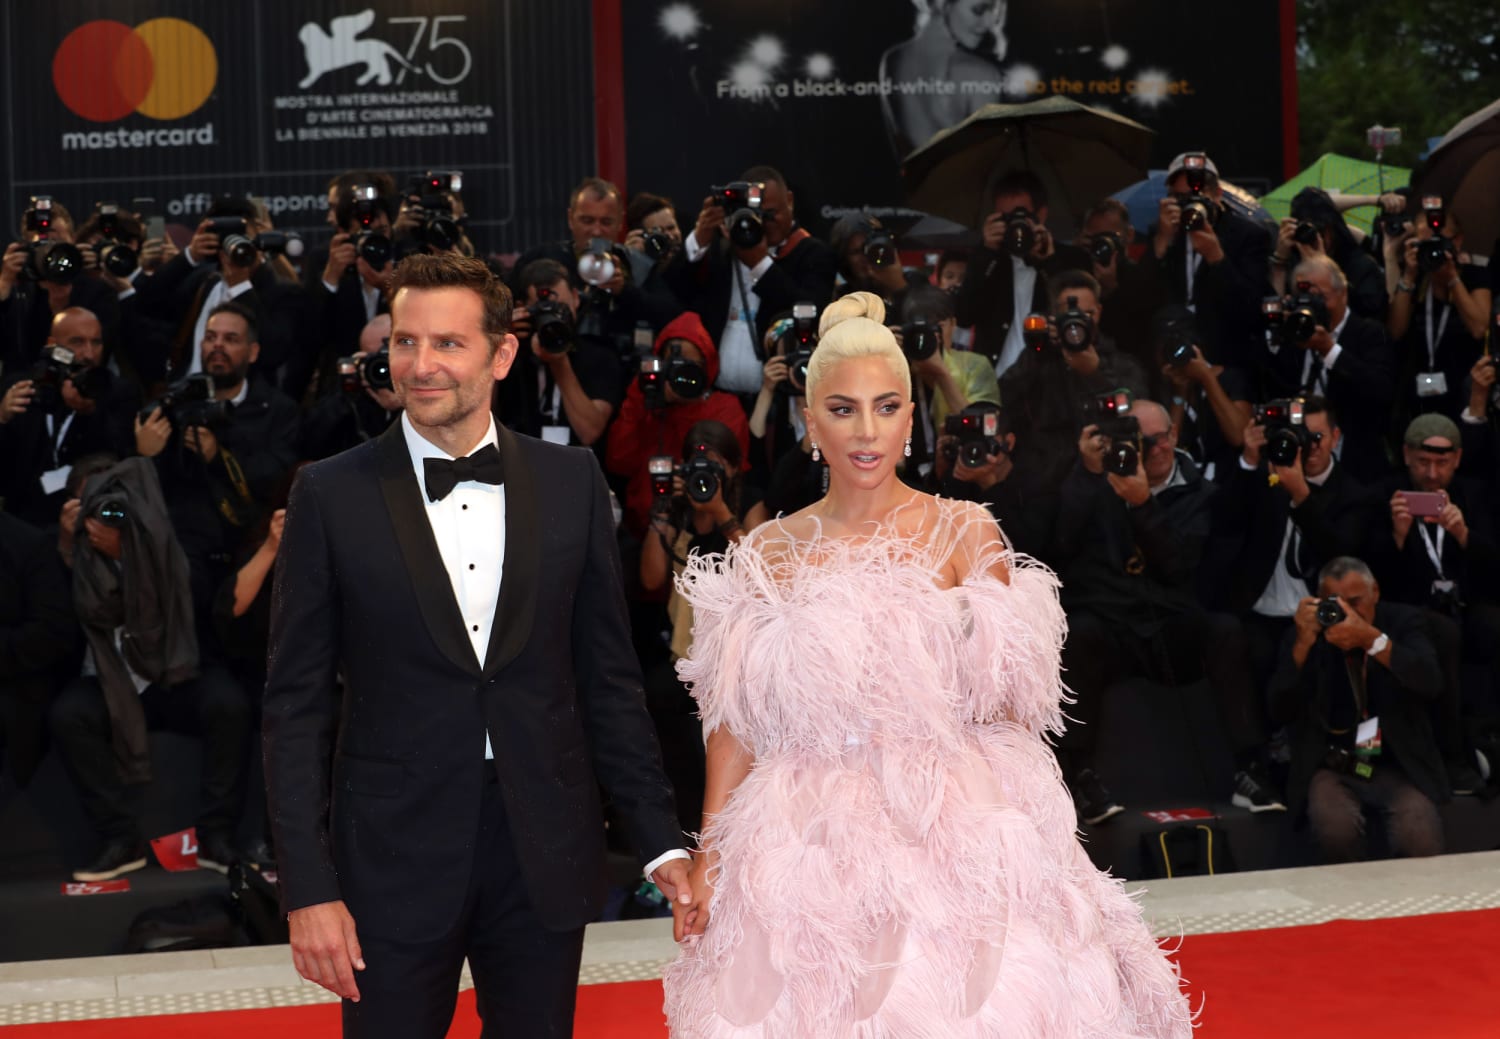 Inside Lady Gaga and Bradley Cooper romance rumours sparked by A